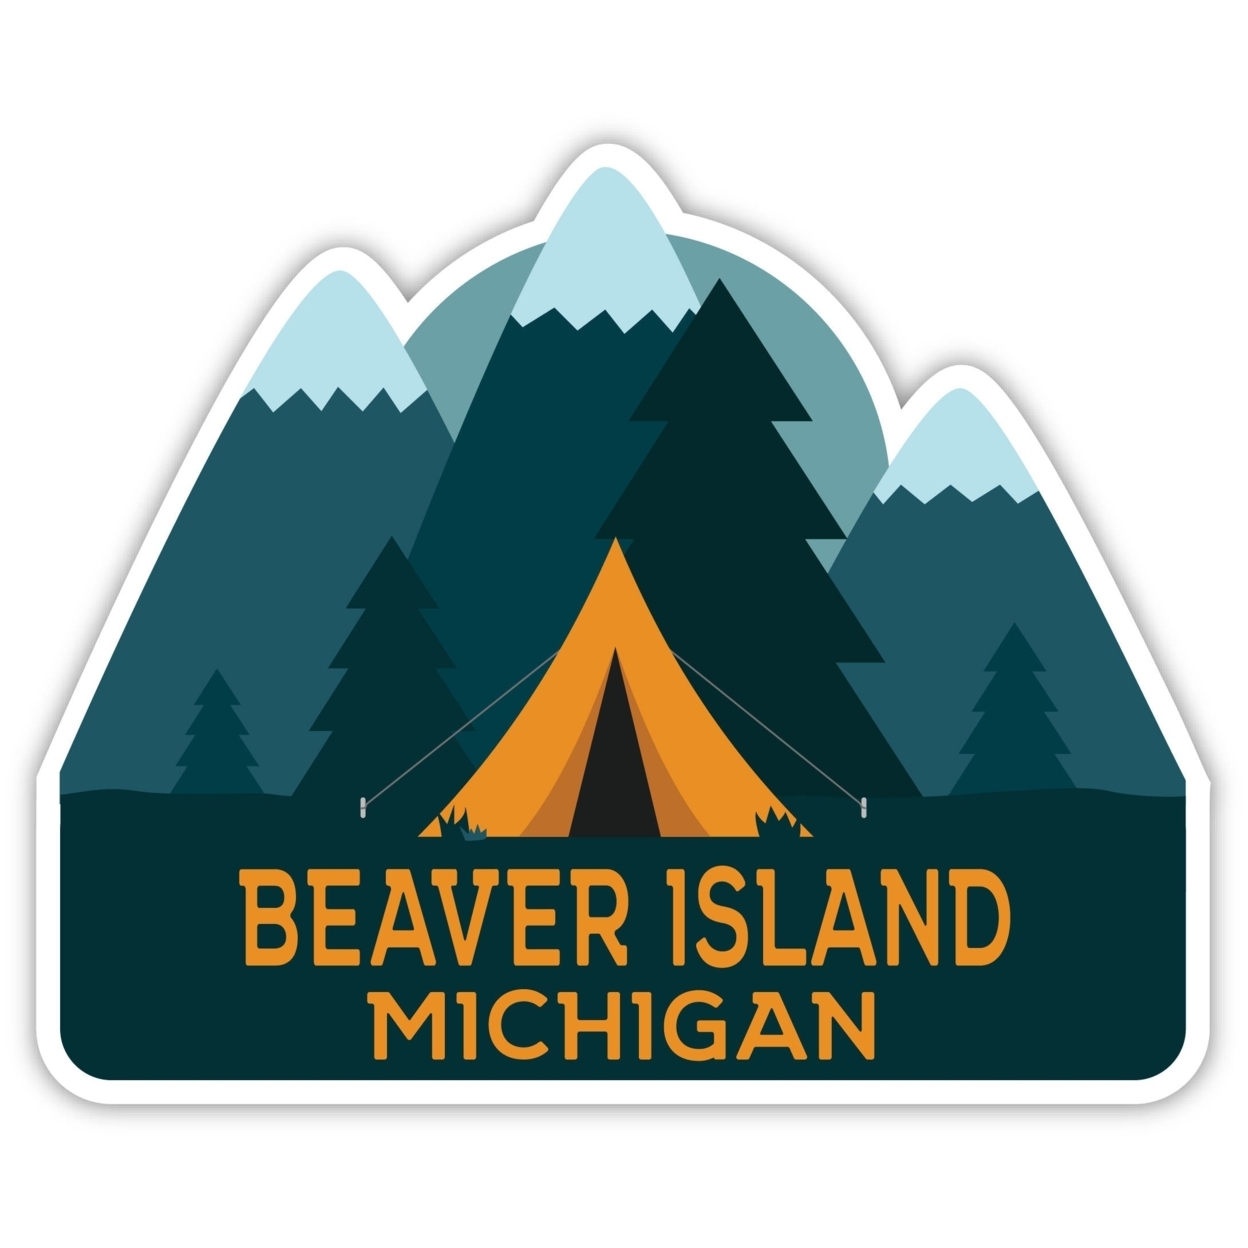 Beaver Island Michigan Souvenir Decorative Stickers (Choose Theme And Size) - 4-Pack, 6-Inch, Tent